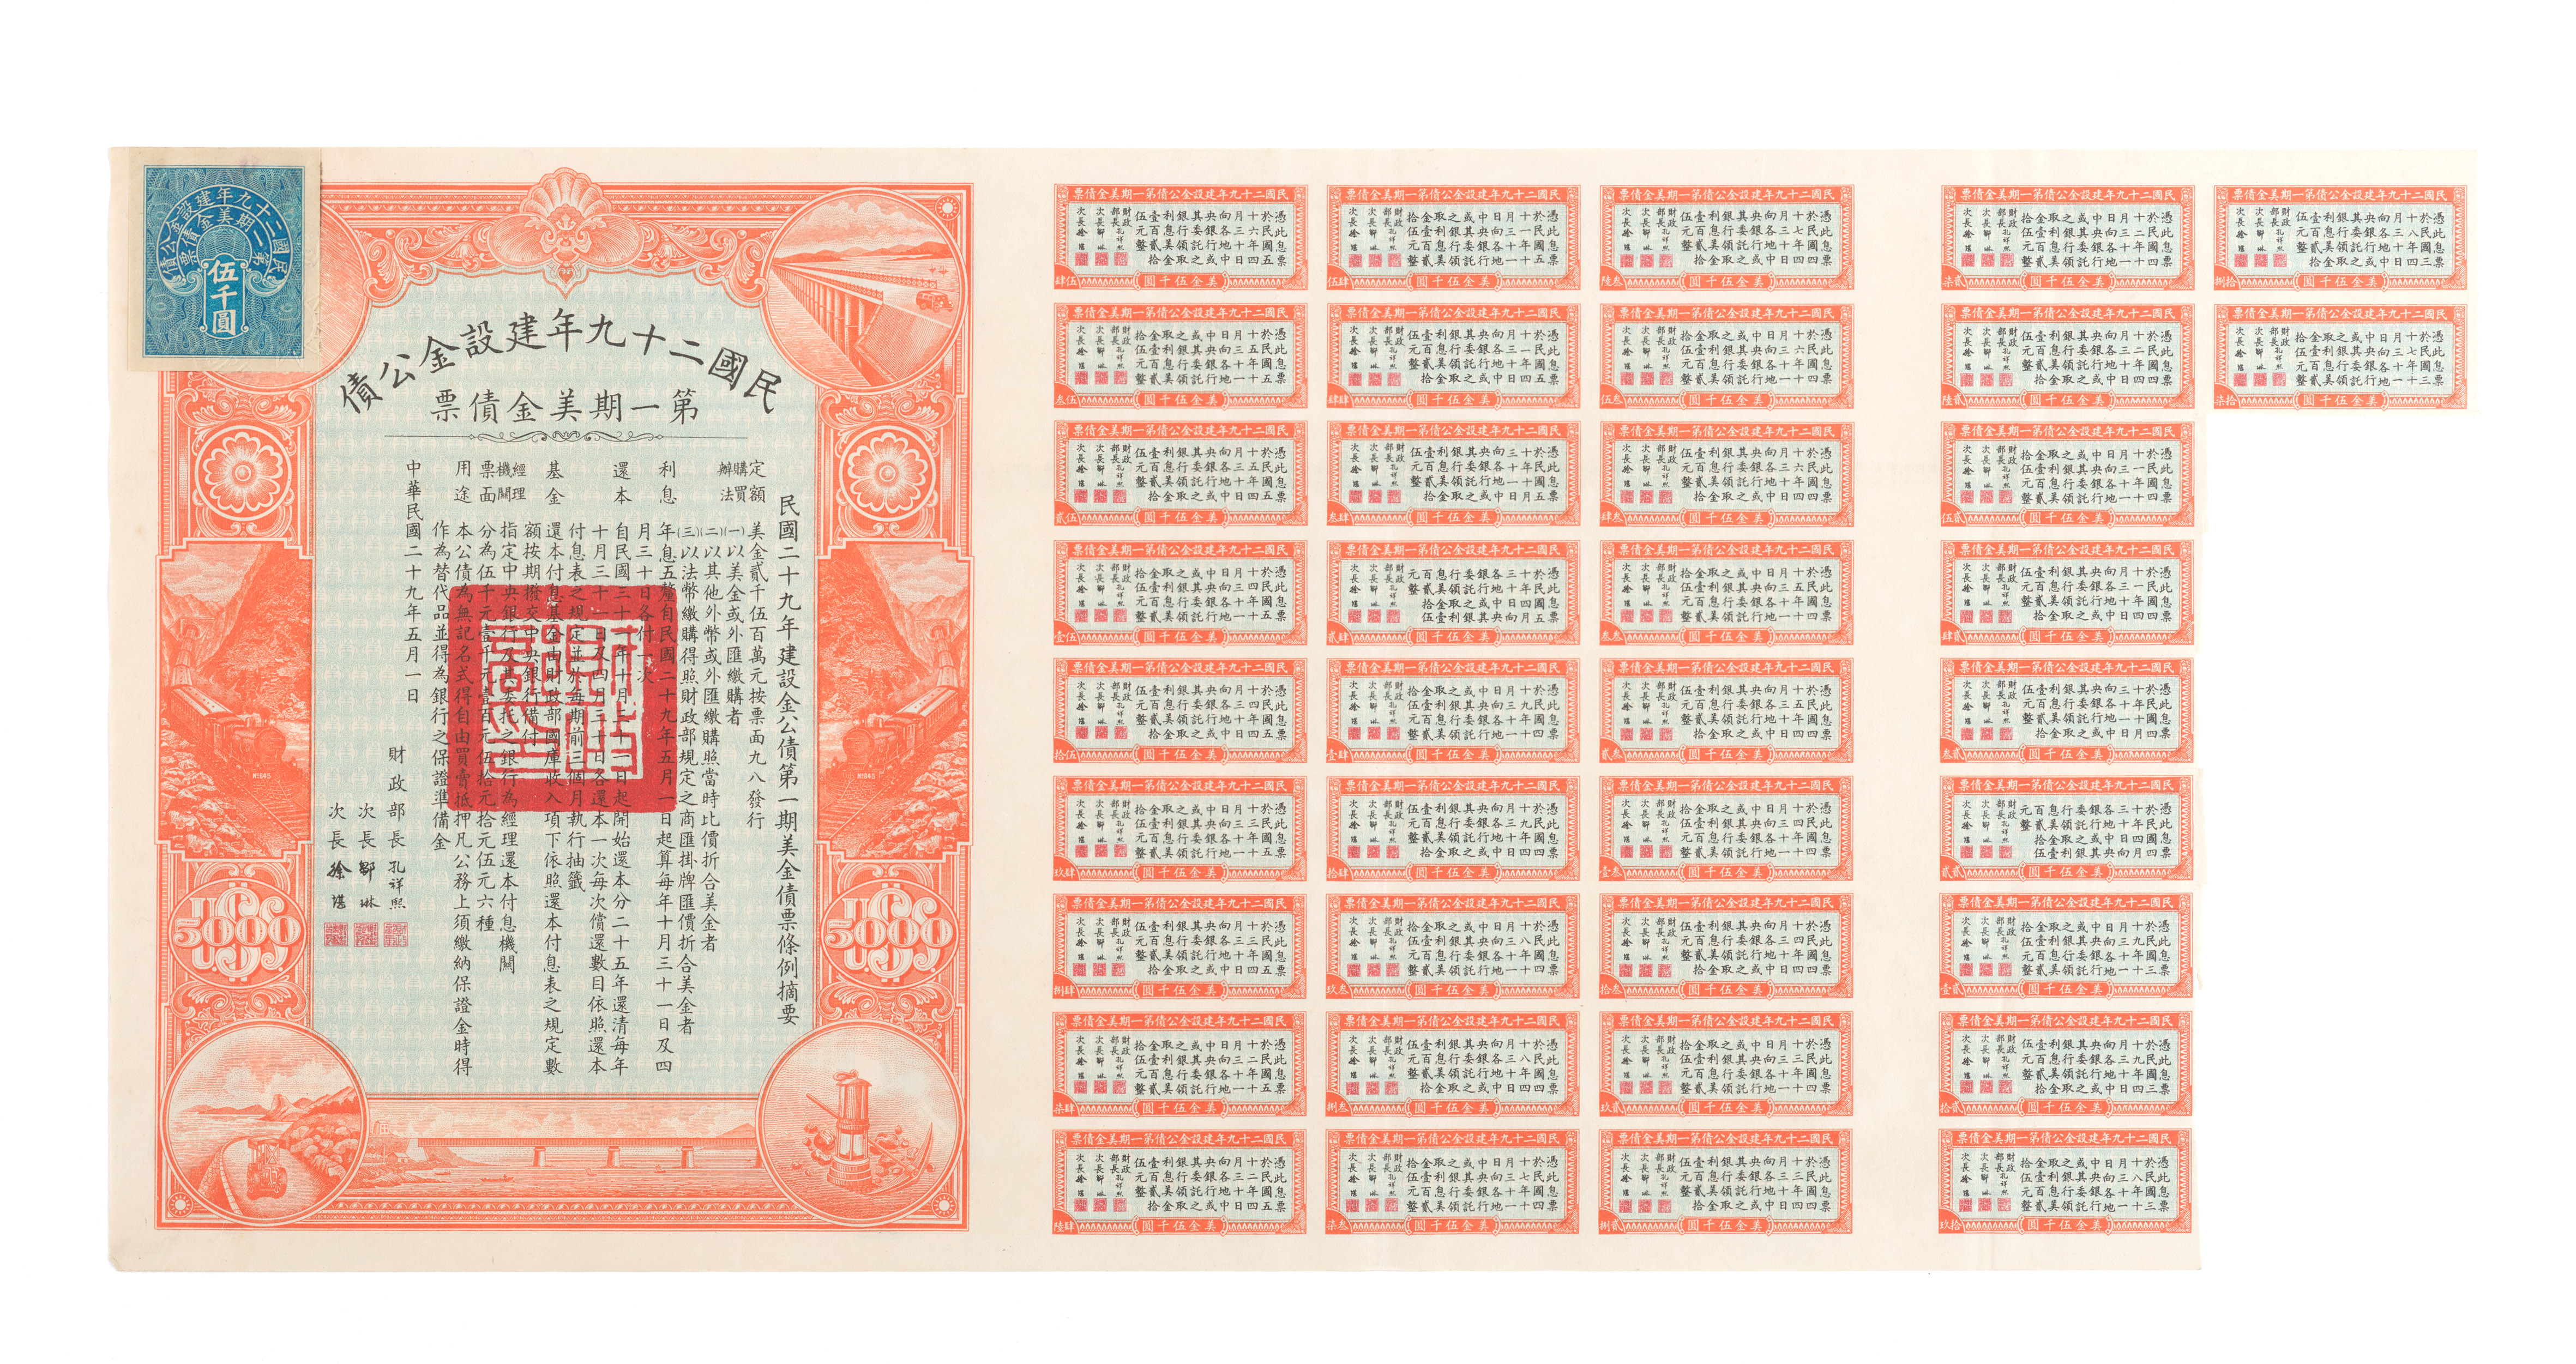 Bonds of the Reconstruction Gold Loan issued with the assistance of the Bank of China Hong Kong Branch, 1940. Courtesy of Bank of China (Hong Kong) Limited.